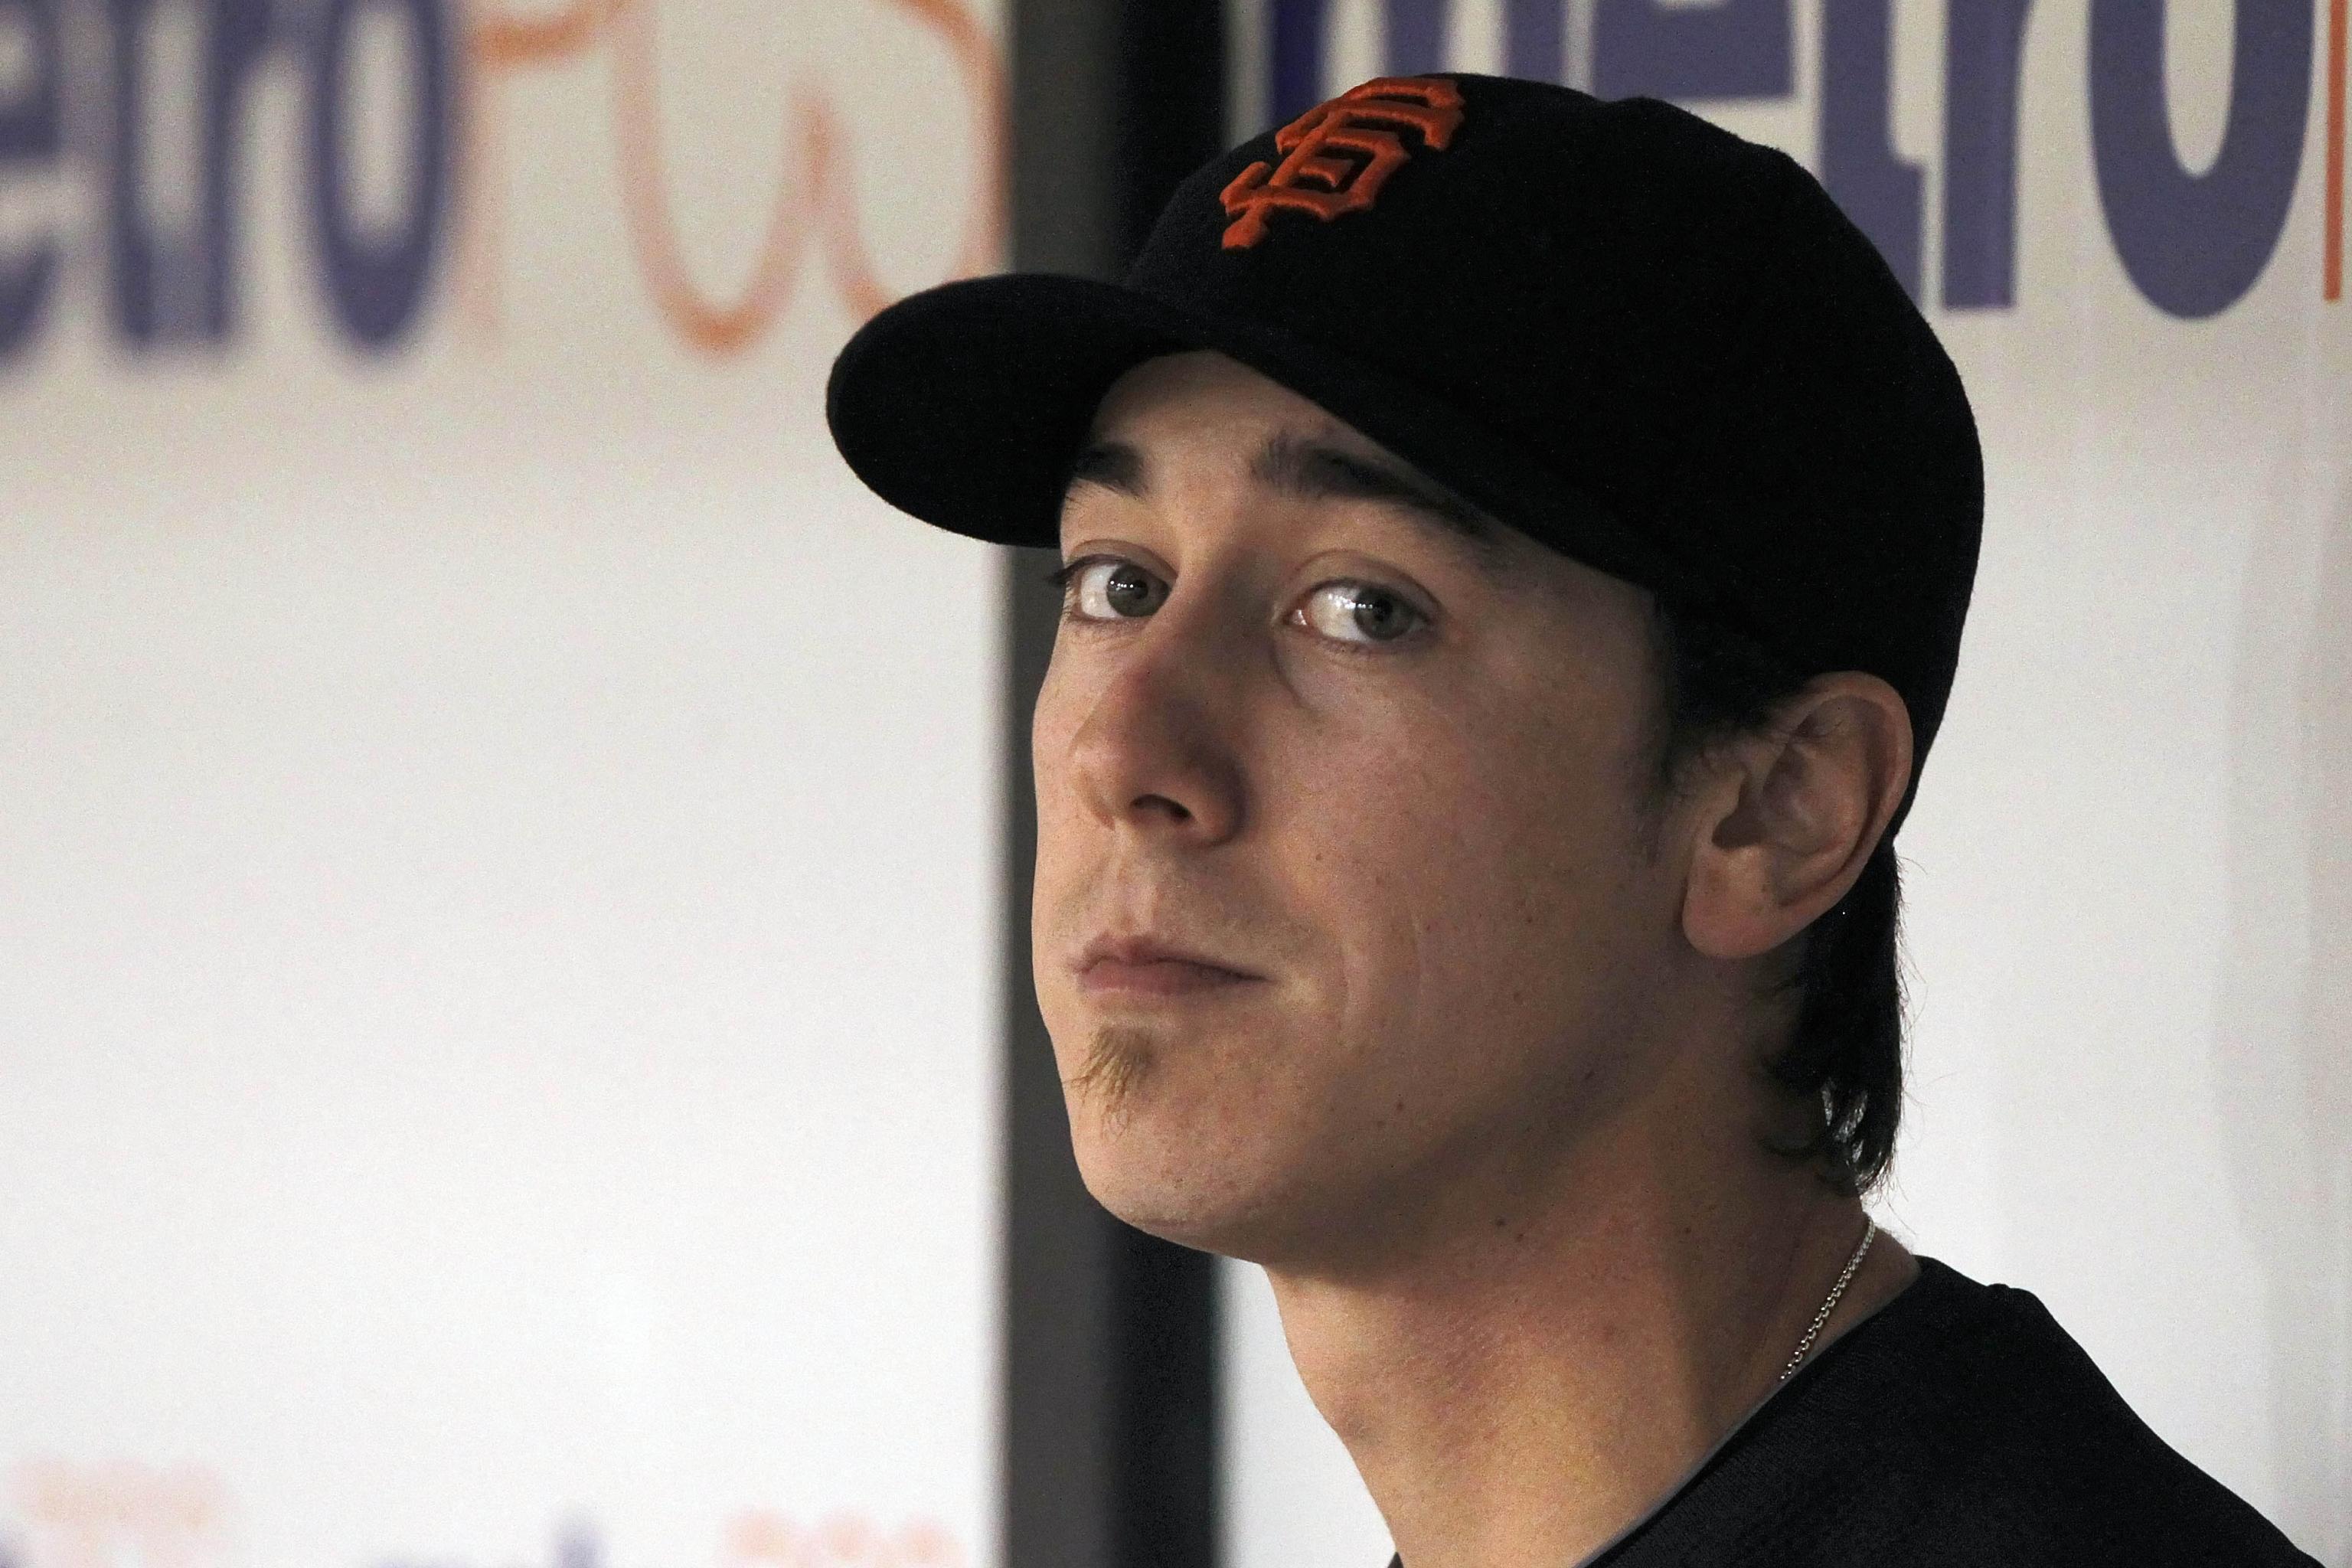 Tim Lincecum pleased with audition, wants starting role